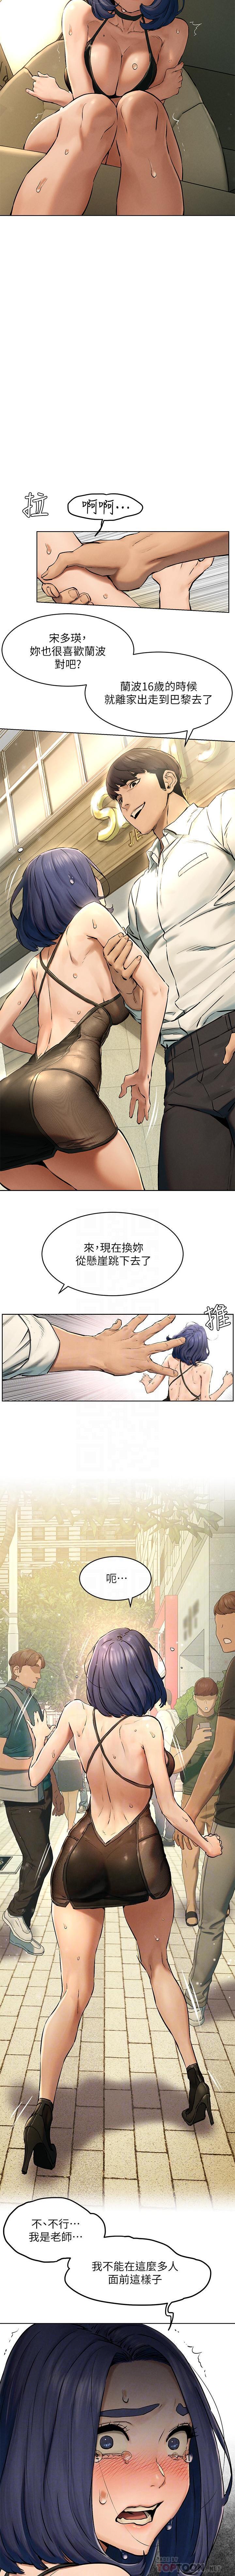 Room 无声的战争 123-141 CHI Blackmail - Page 7